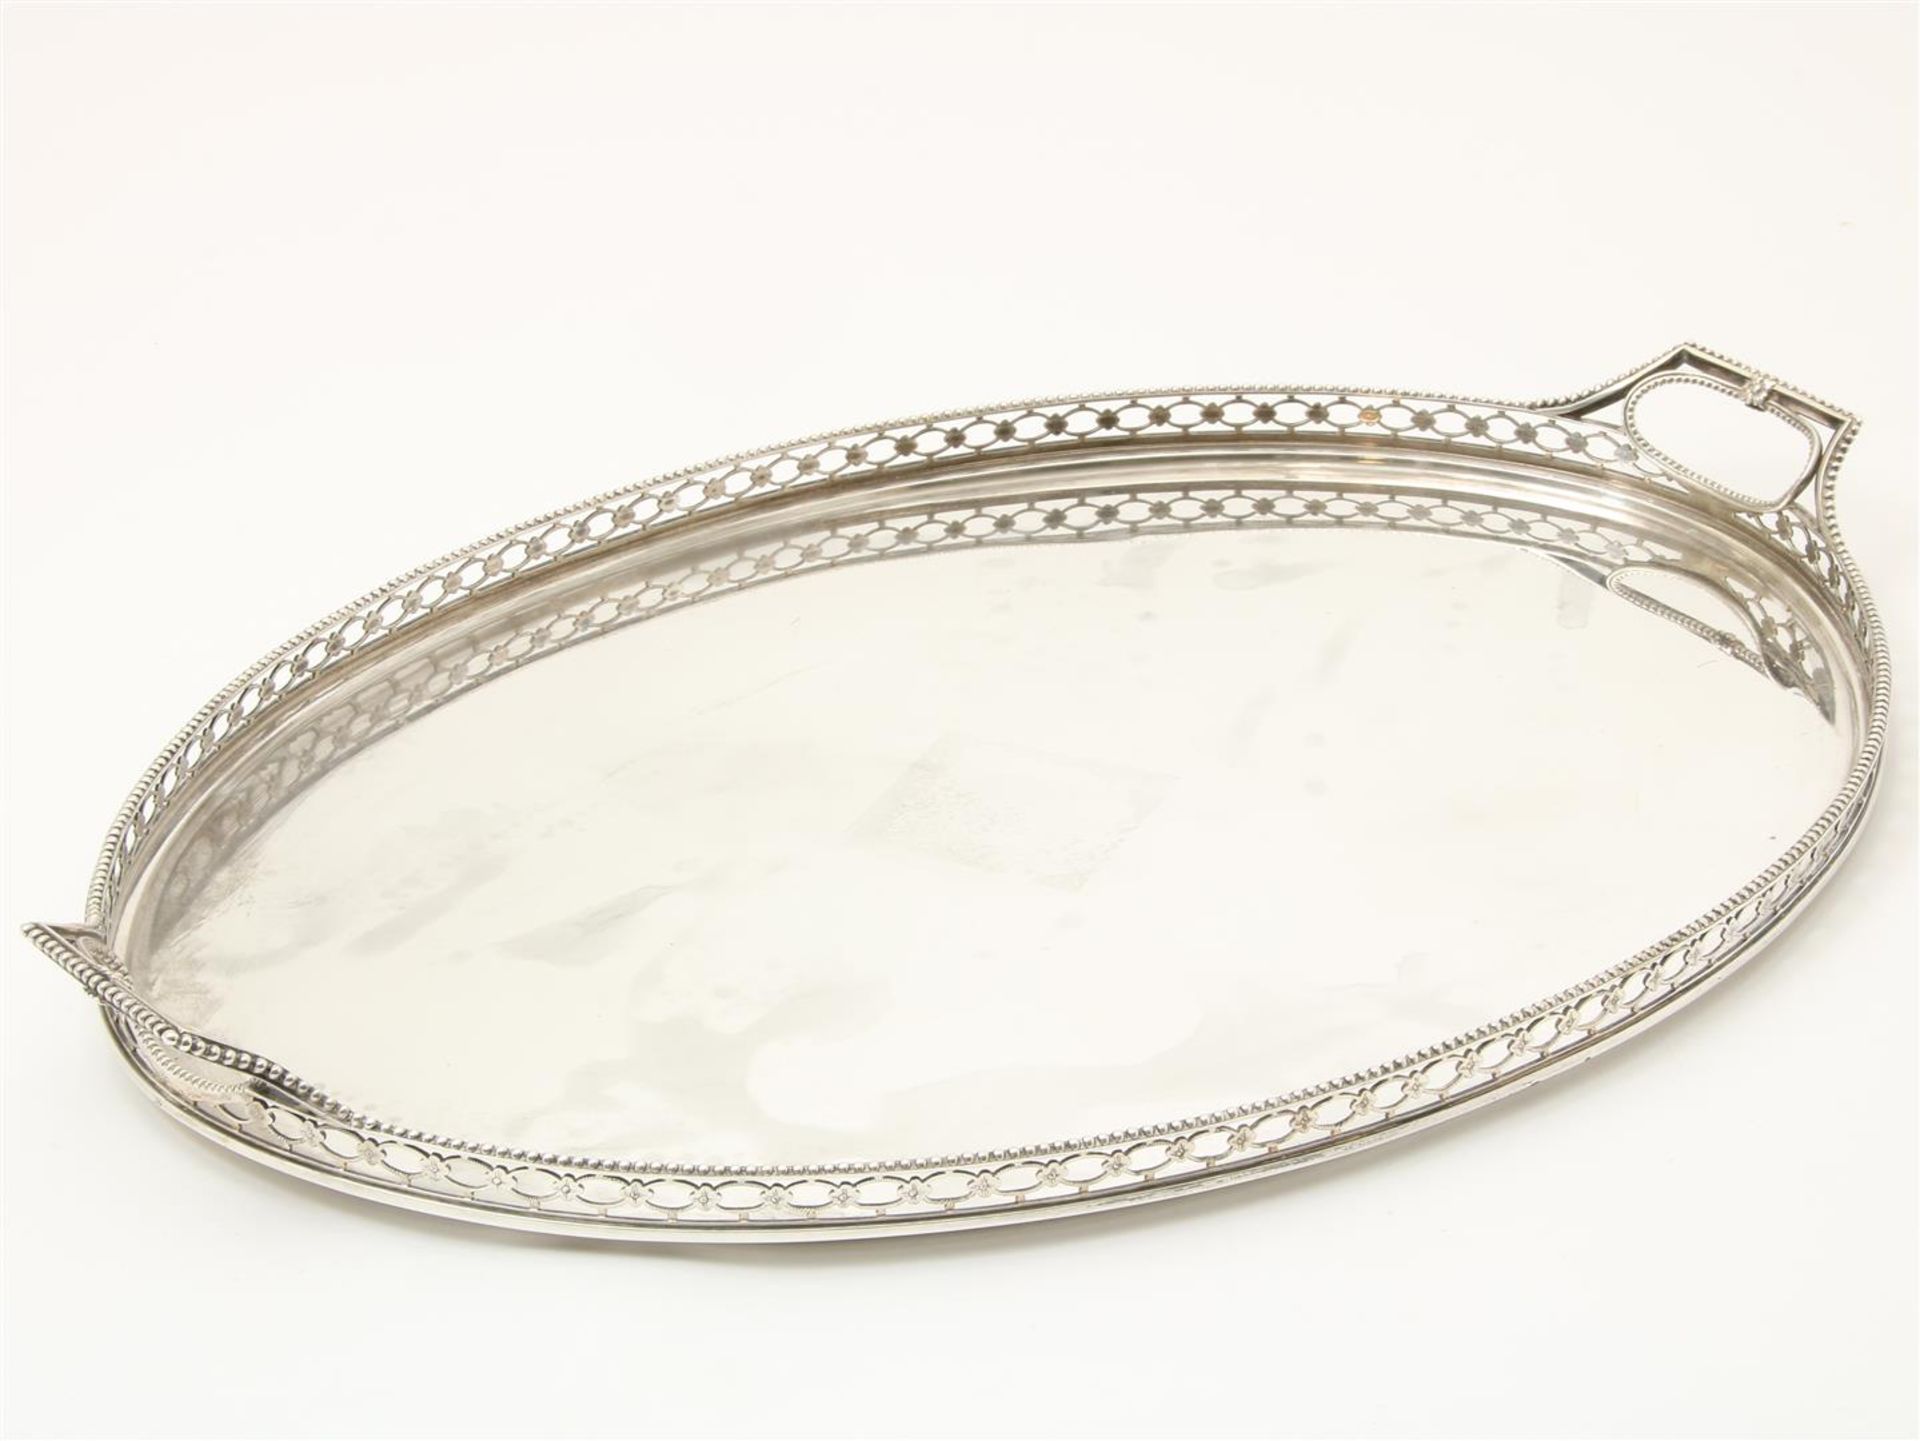 Oval silver tray Amsterdam, Mt. D.W.Rethmeijer, year letter F = 1790, decorated with openwork edge